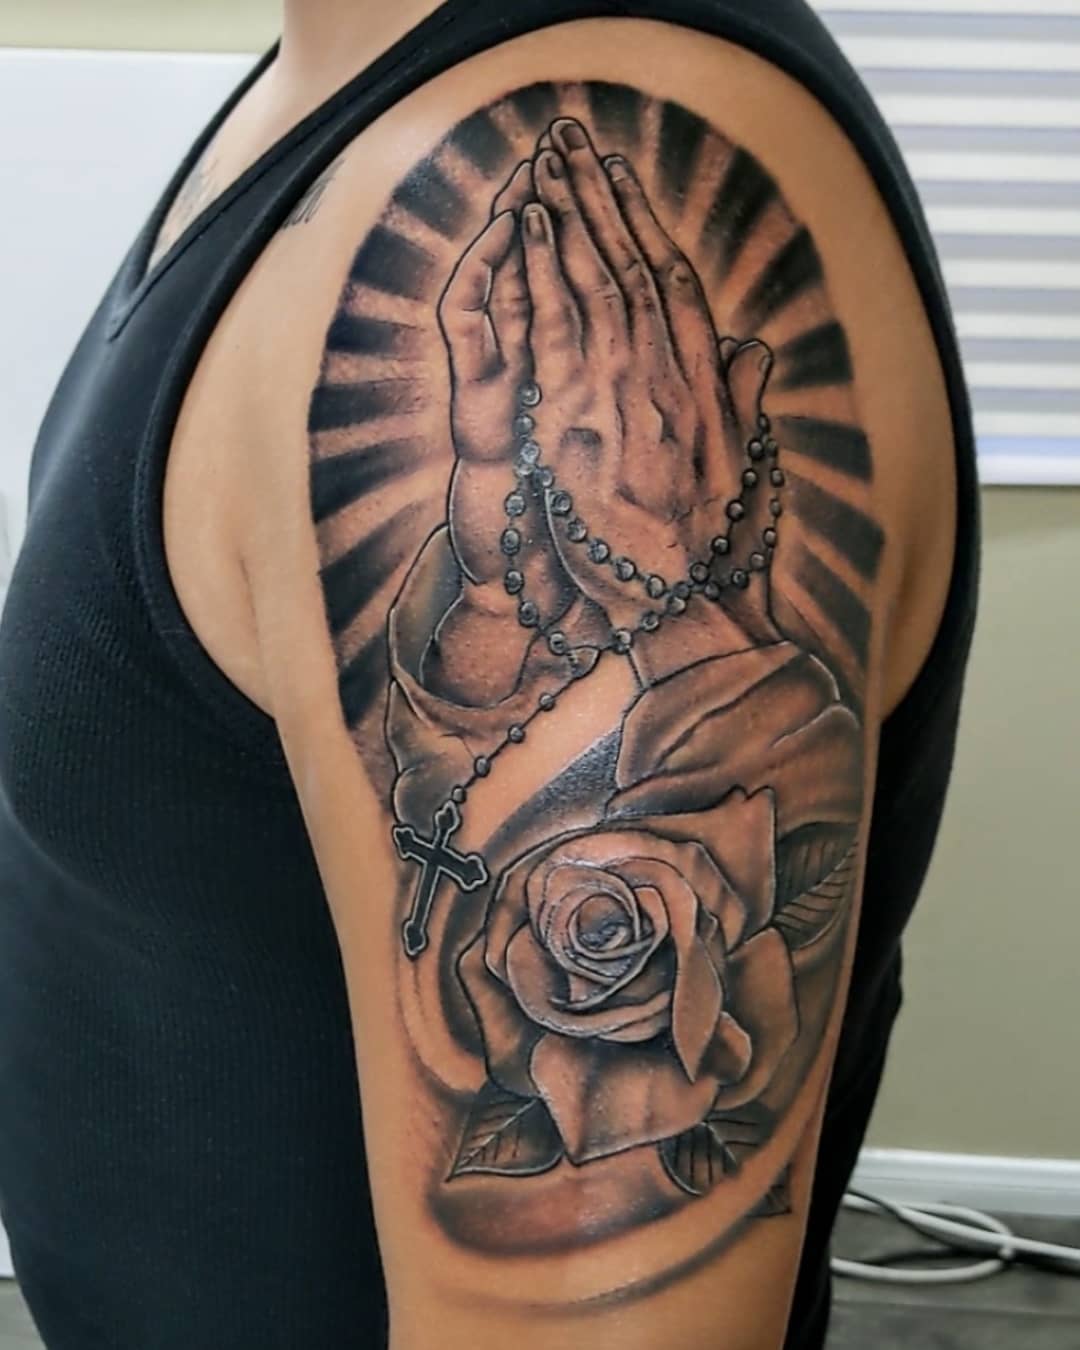 Show your religion on your shoulder in a great way and have it on your body forever. What are you waiting for?